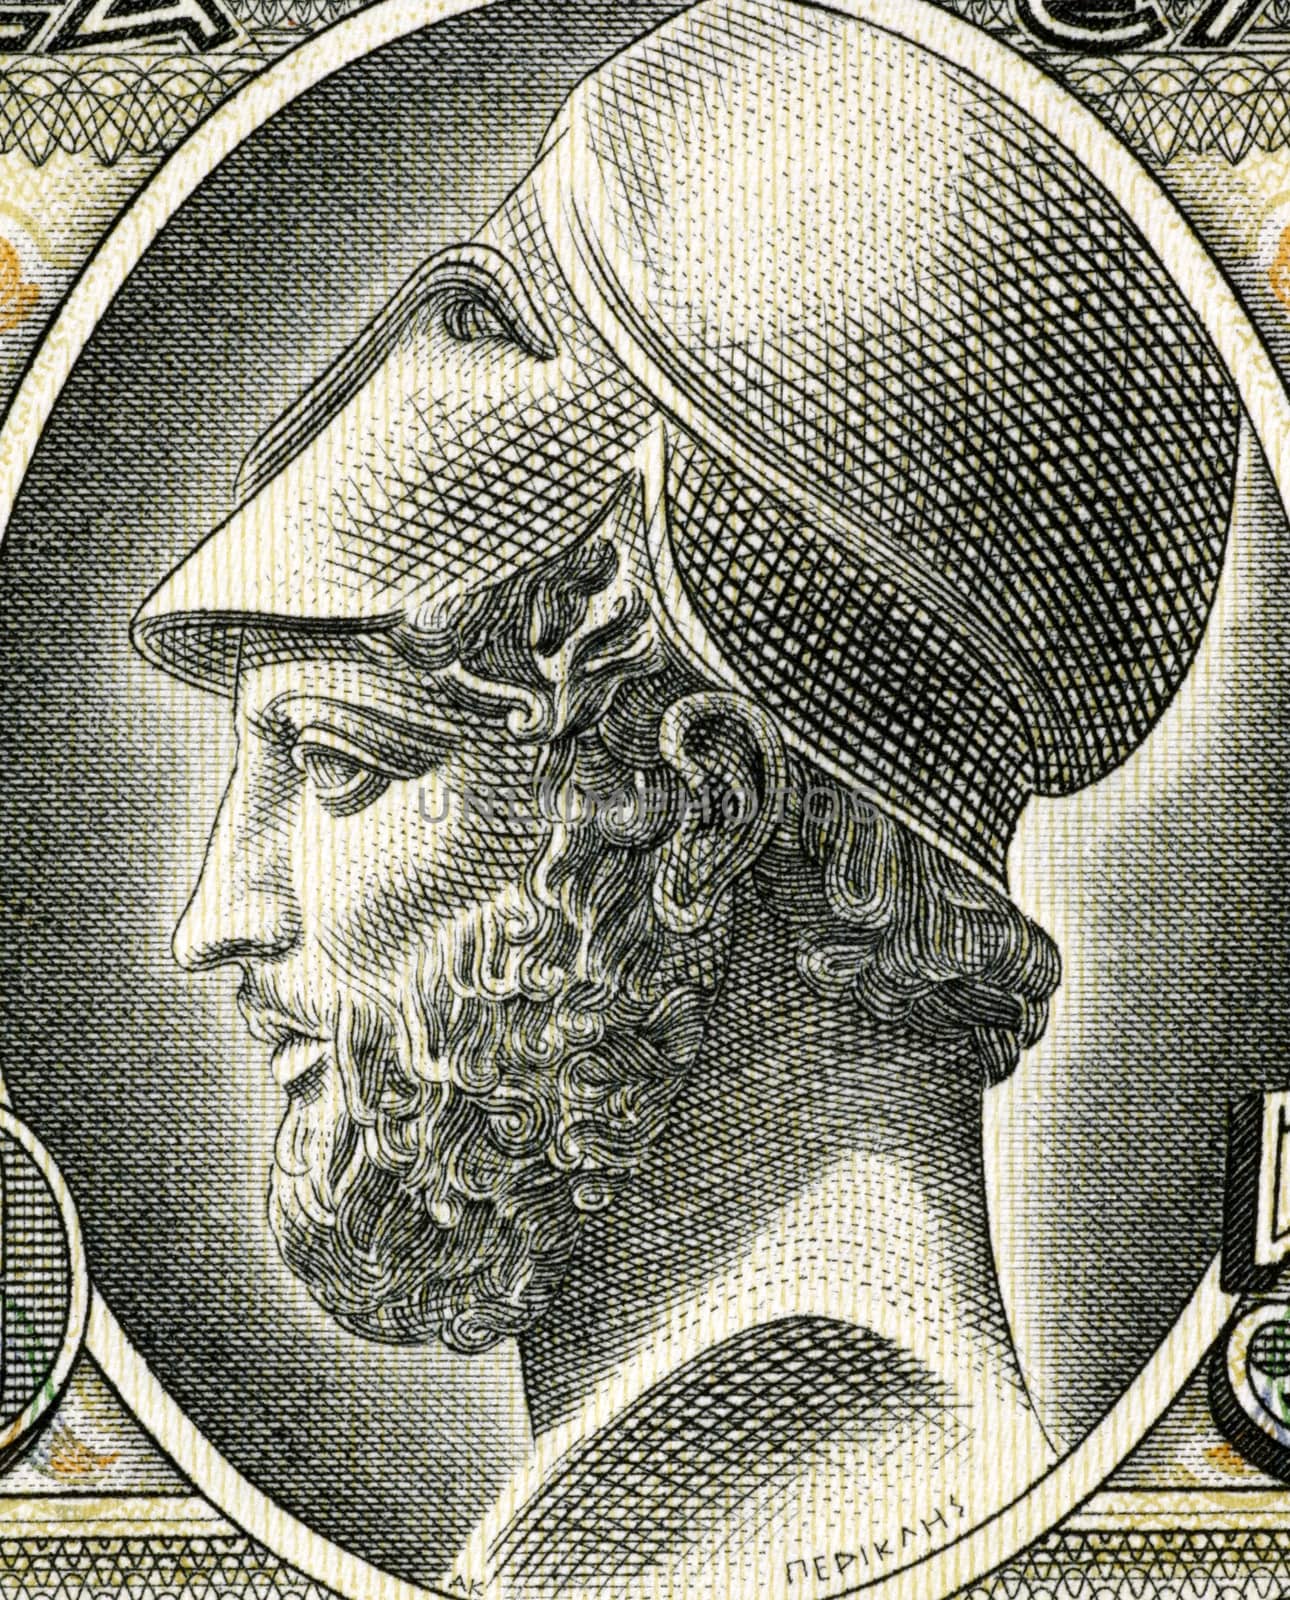 Pericles (495��� 429 BC) on 50 Drachmai 1955 Banknote from Greece. Most prominent and influential Greek statesman, orator and general of Athens during the Golden Age.